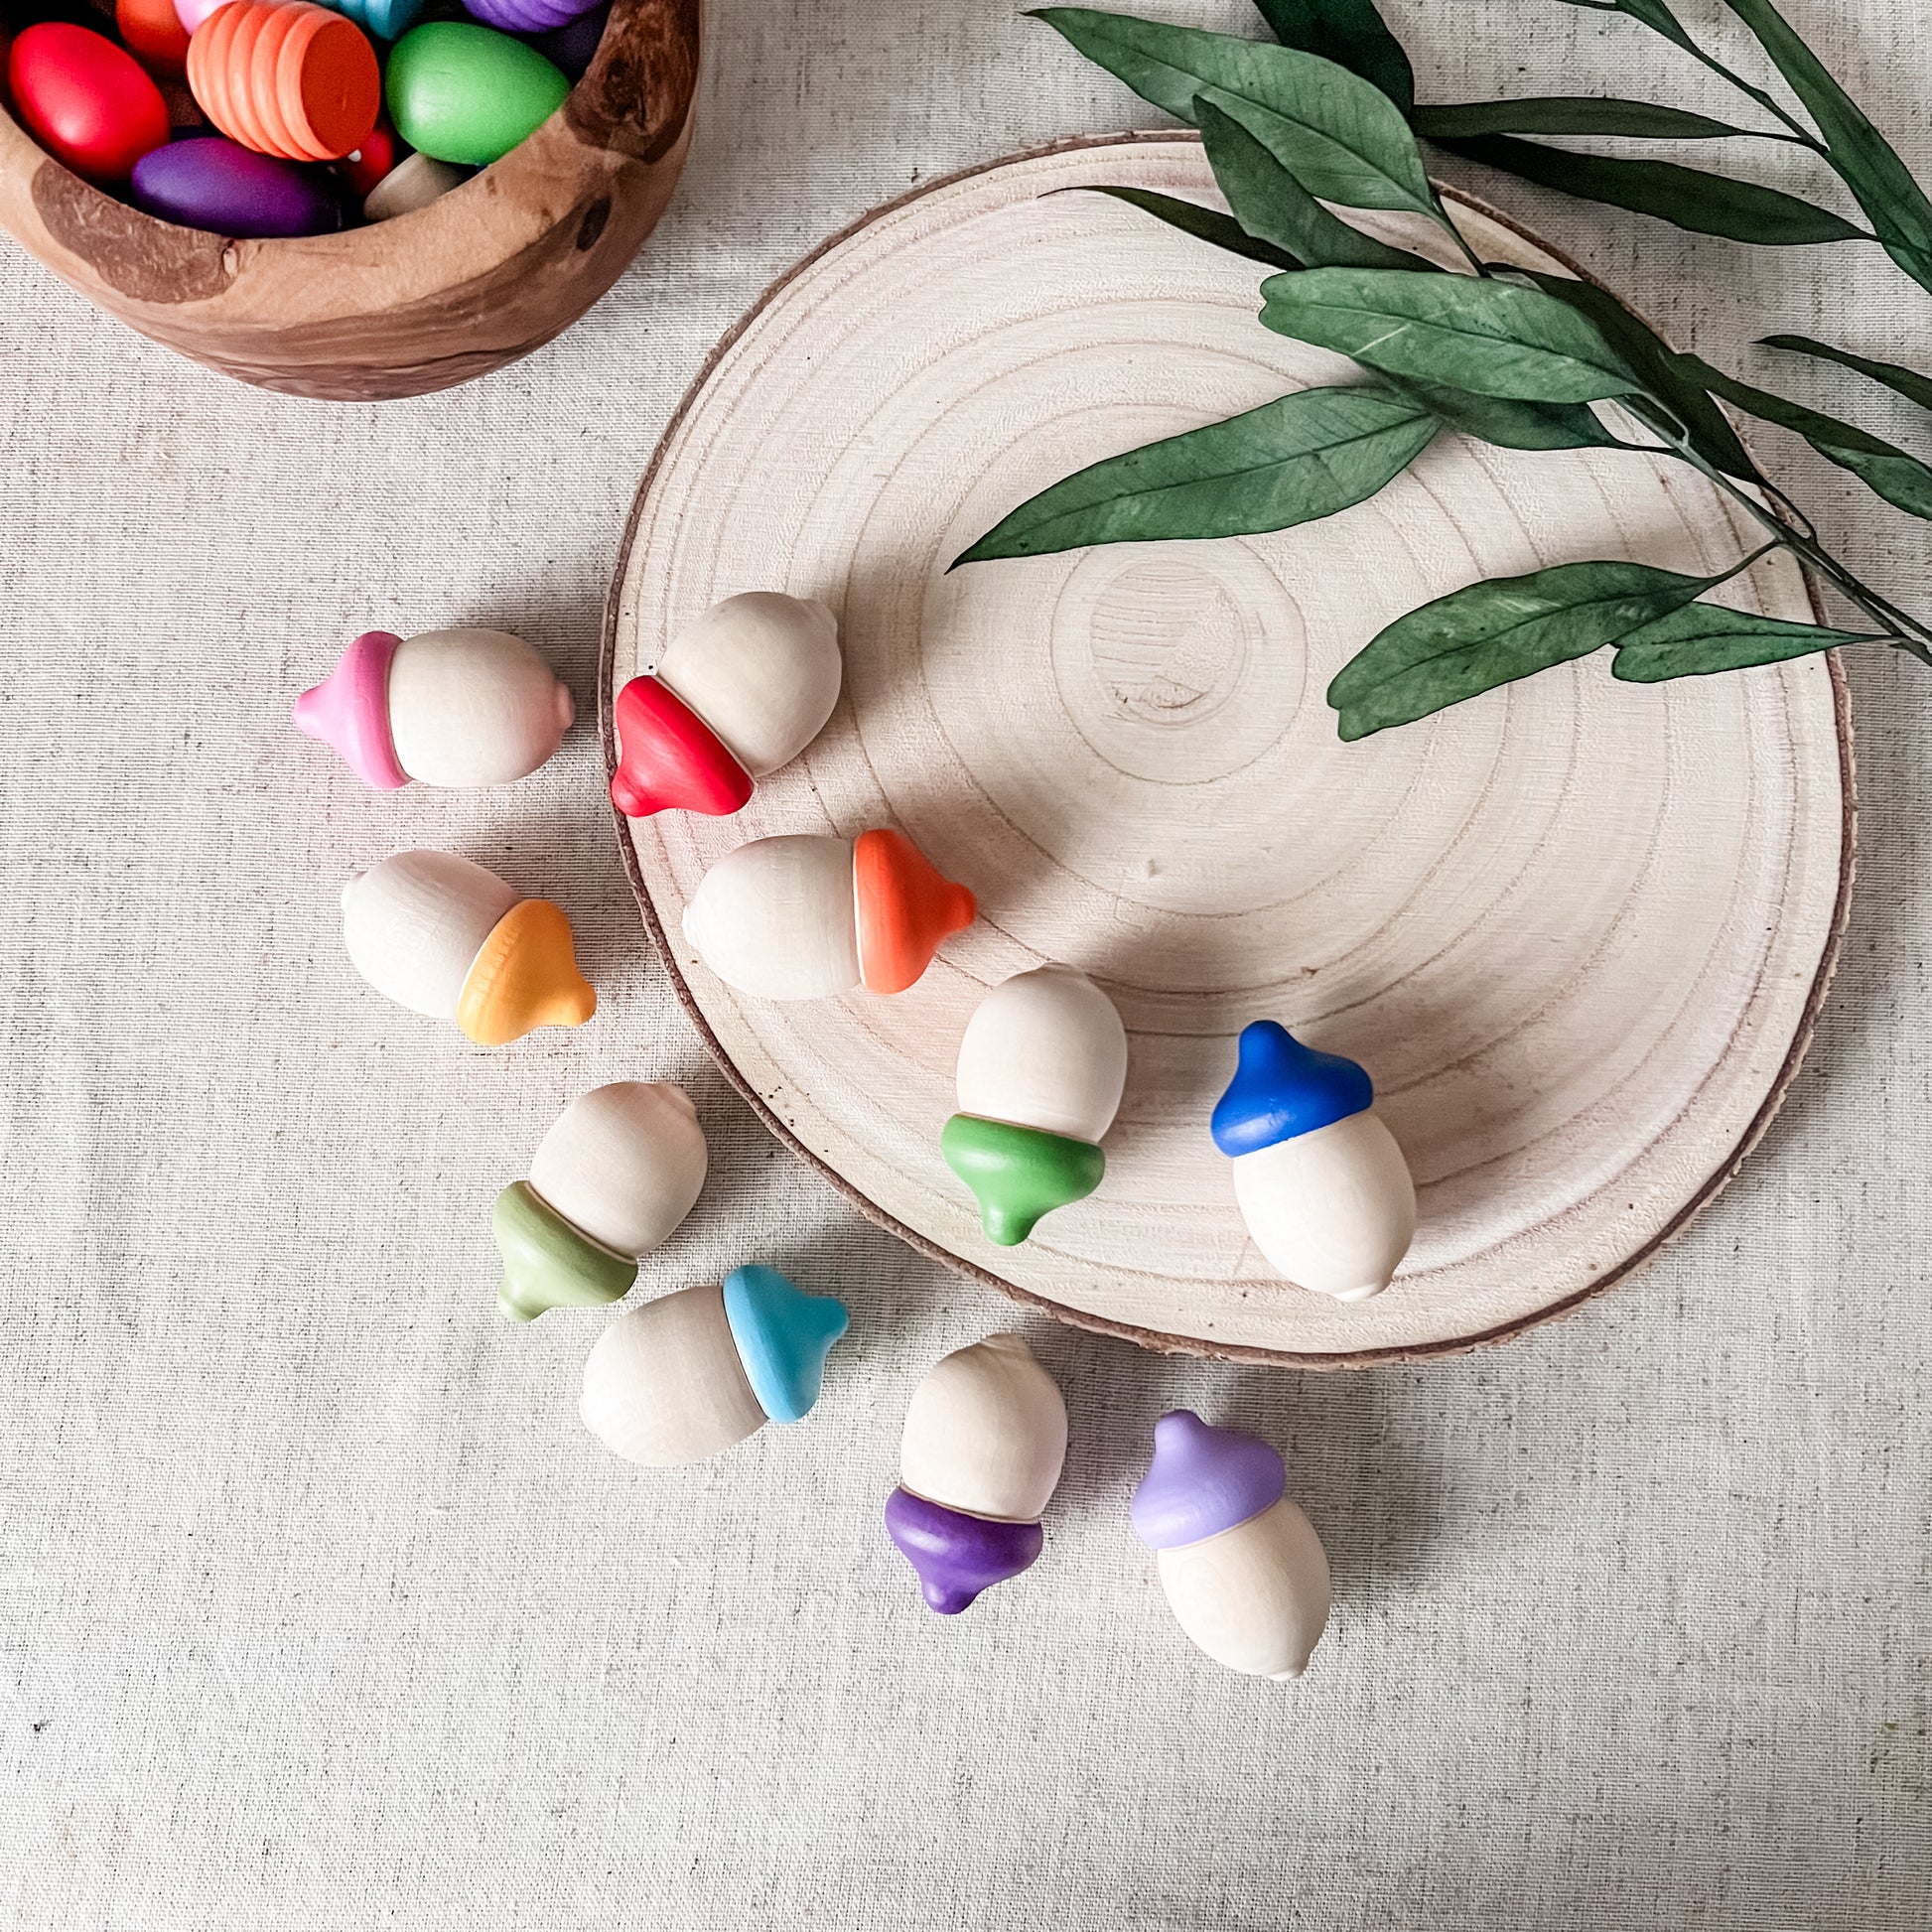 10 Toddler Size Rainbow Acorns - Chickadees Wooden Toys